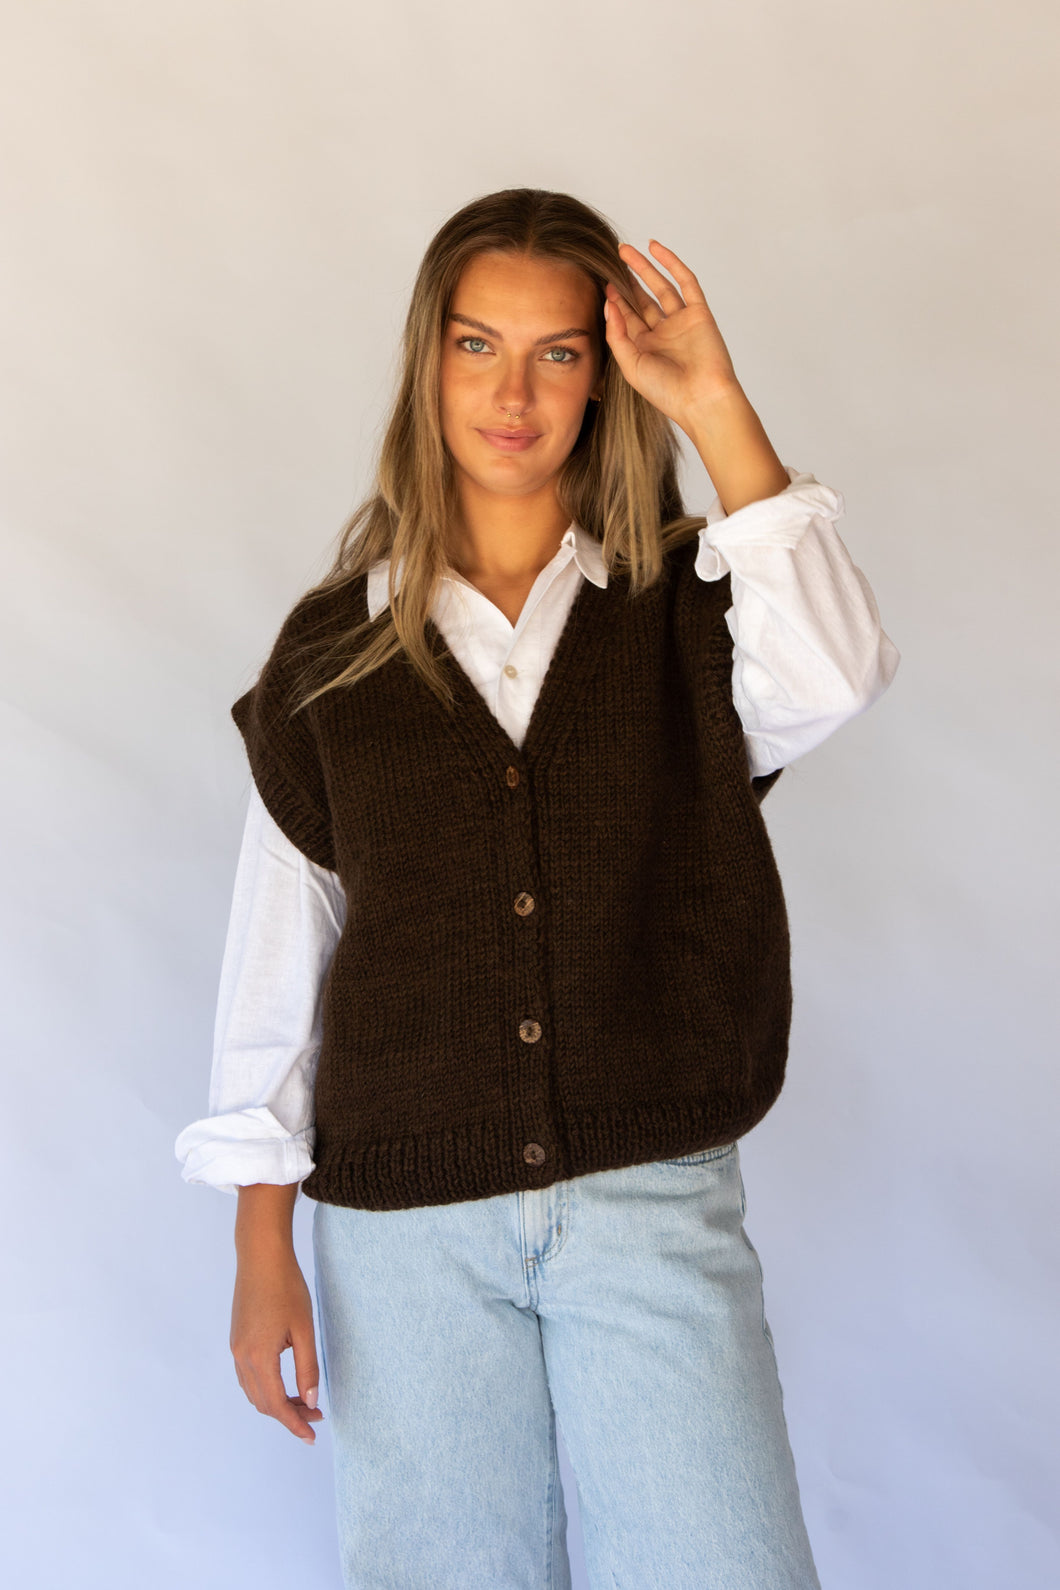 Hand Knitted Button Vest in Cocoa or Oatmeal from Hobo and Hatch